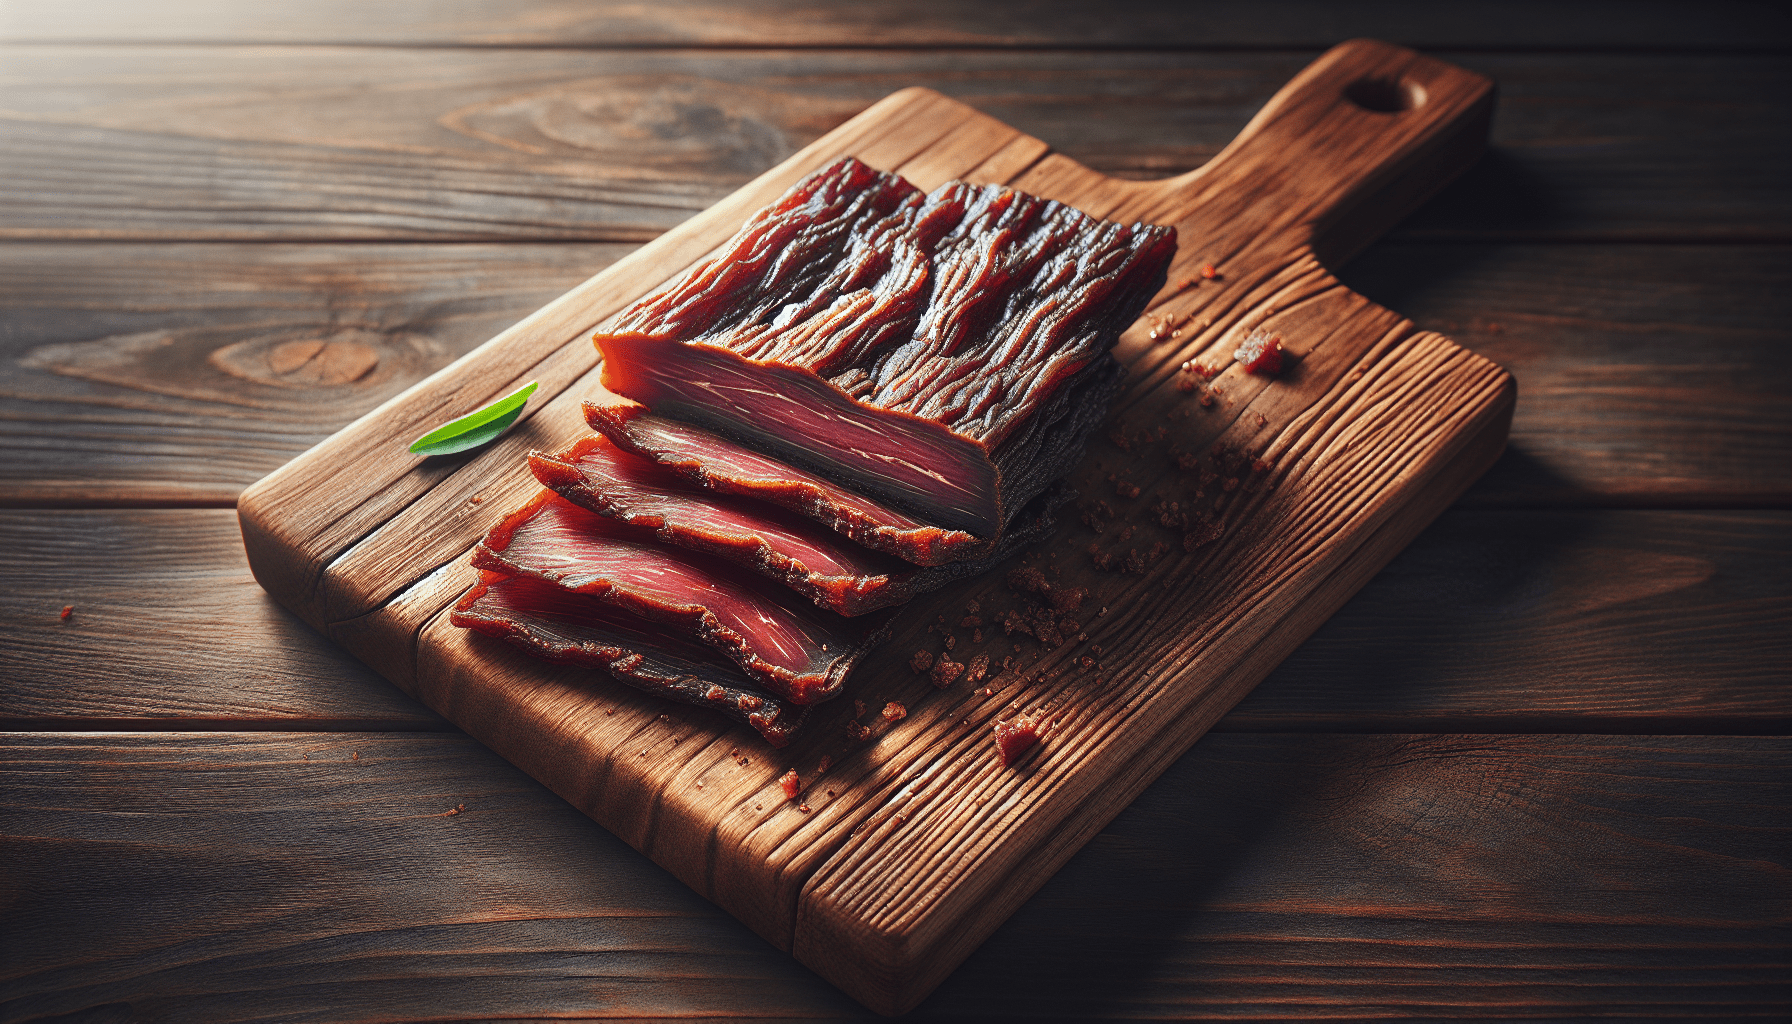 The Complete Guide to Snacking for Carnivores